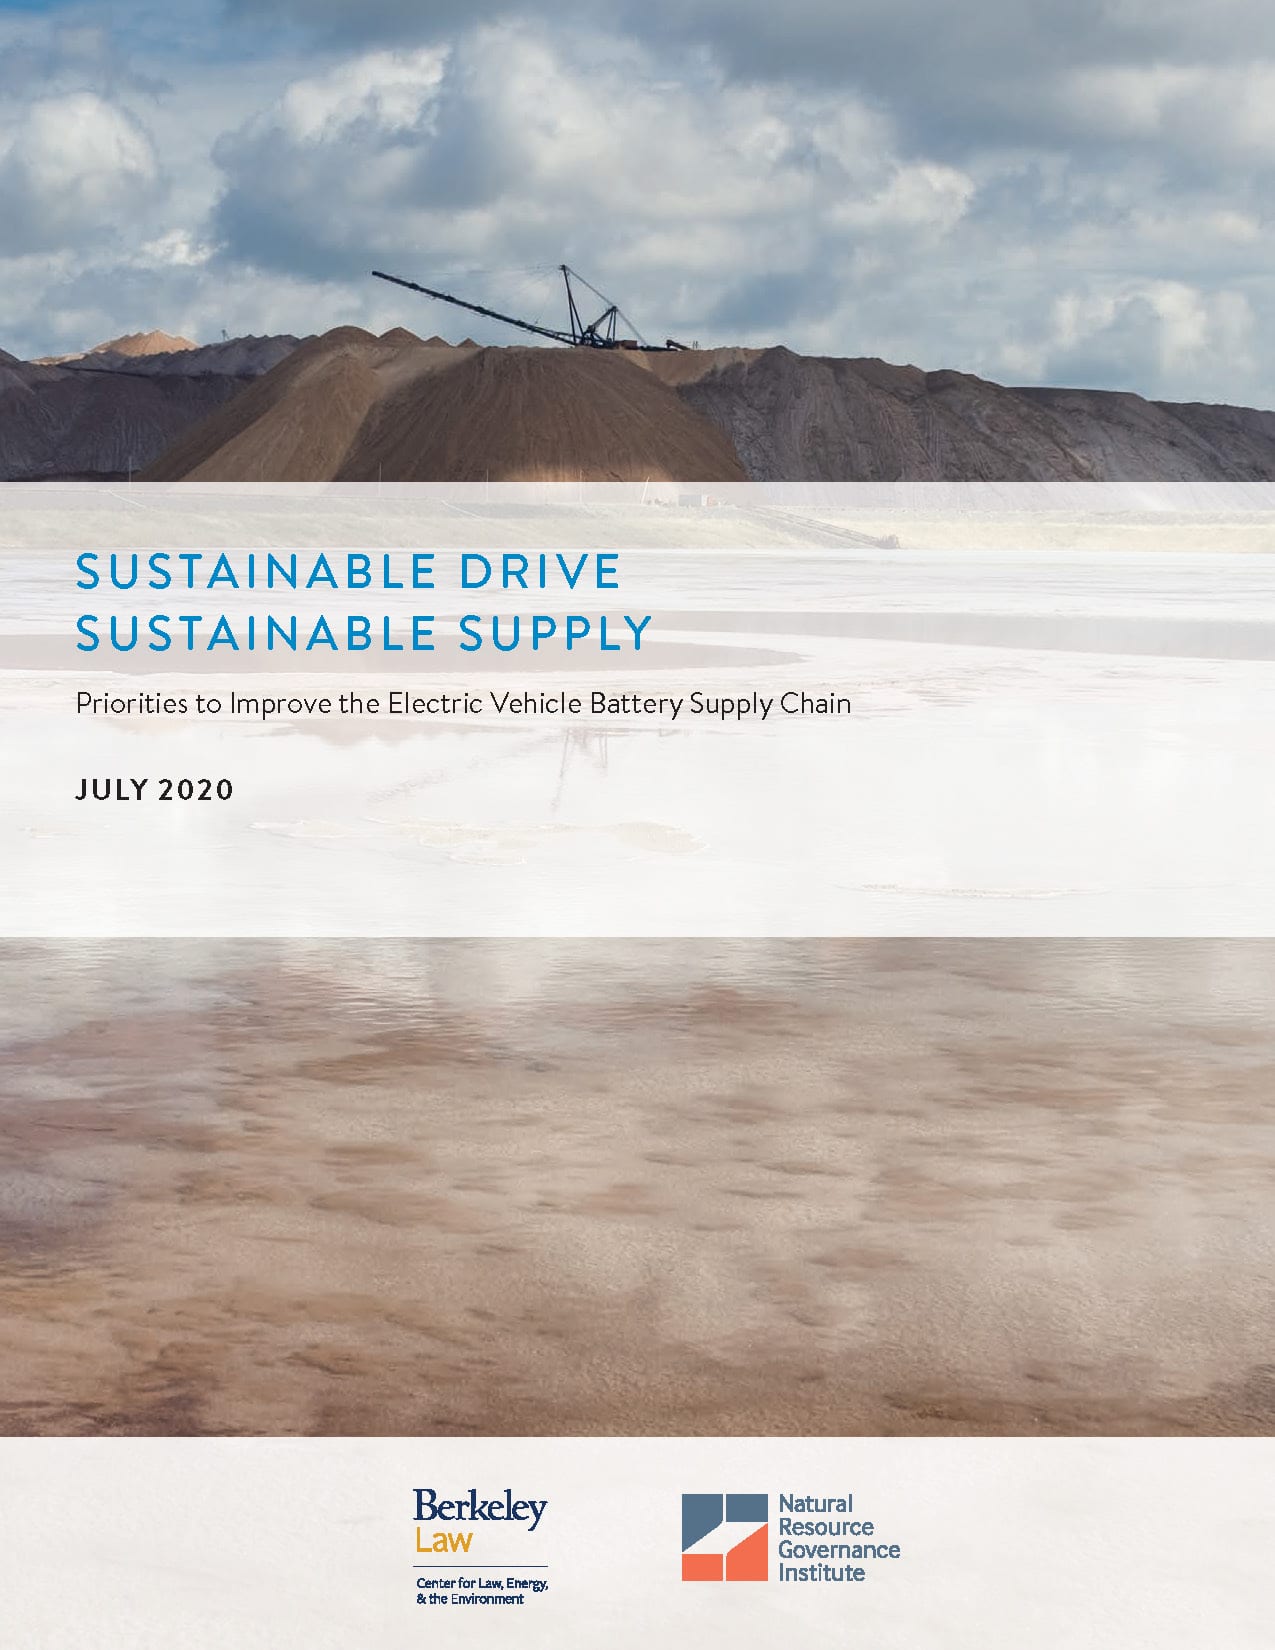 View PDF report "Sustainable Drive, Sustainable Supply: Priorities to Improve the Electric Vehicle Battery Supply Chain"